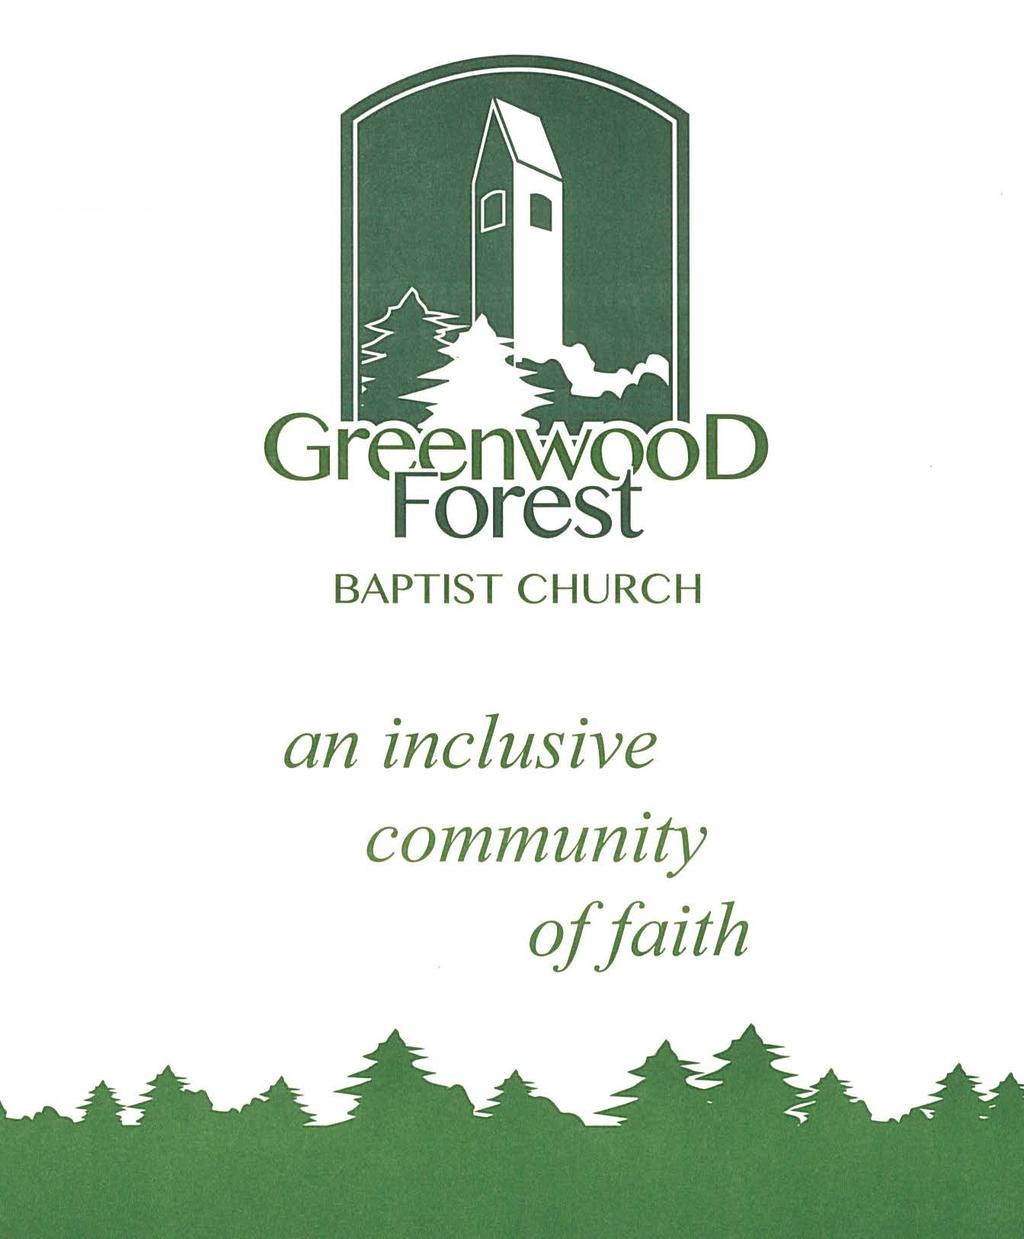 GREENWOOD FOREST BAPTIST CHURCH The Worship of God The Tenth Sunday of Pentecost August 13, 2017 Chiming of the Hour Gathering Hymn 566 (v.